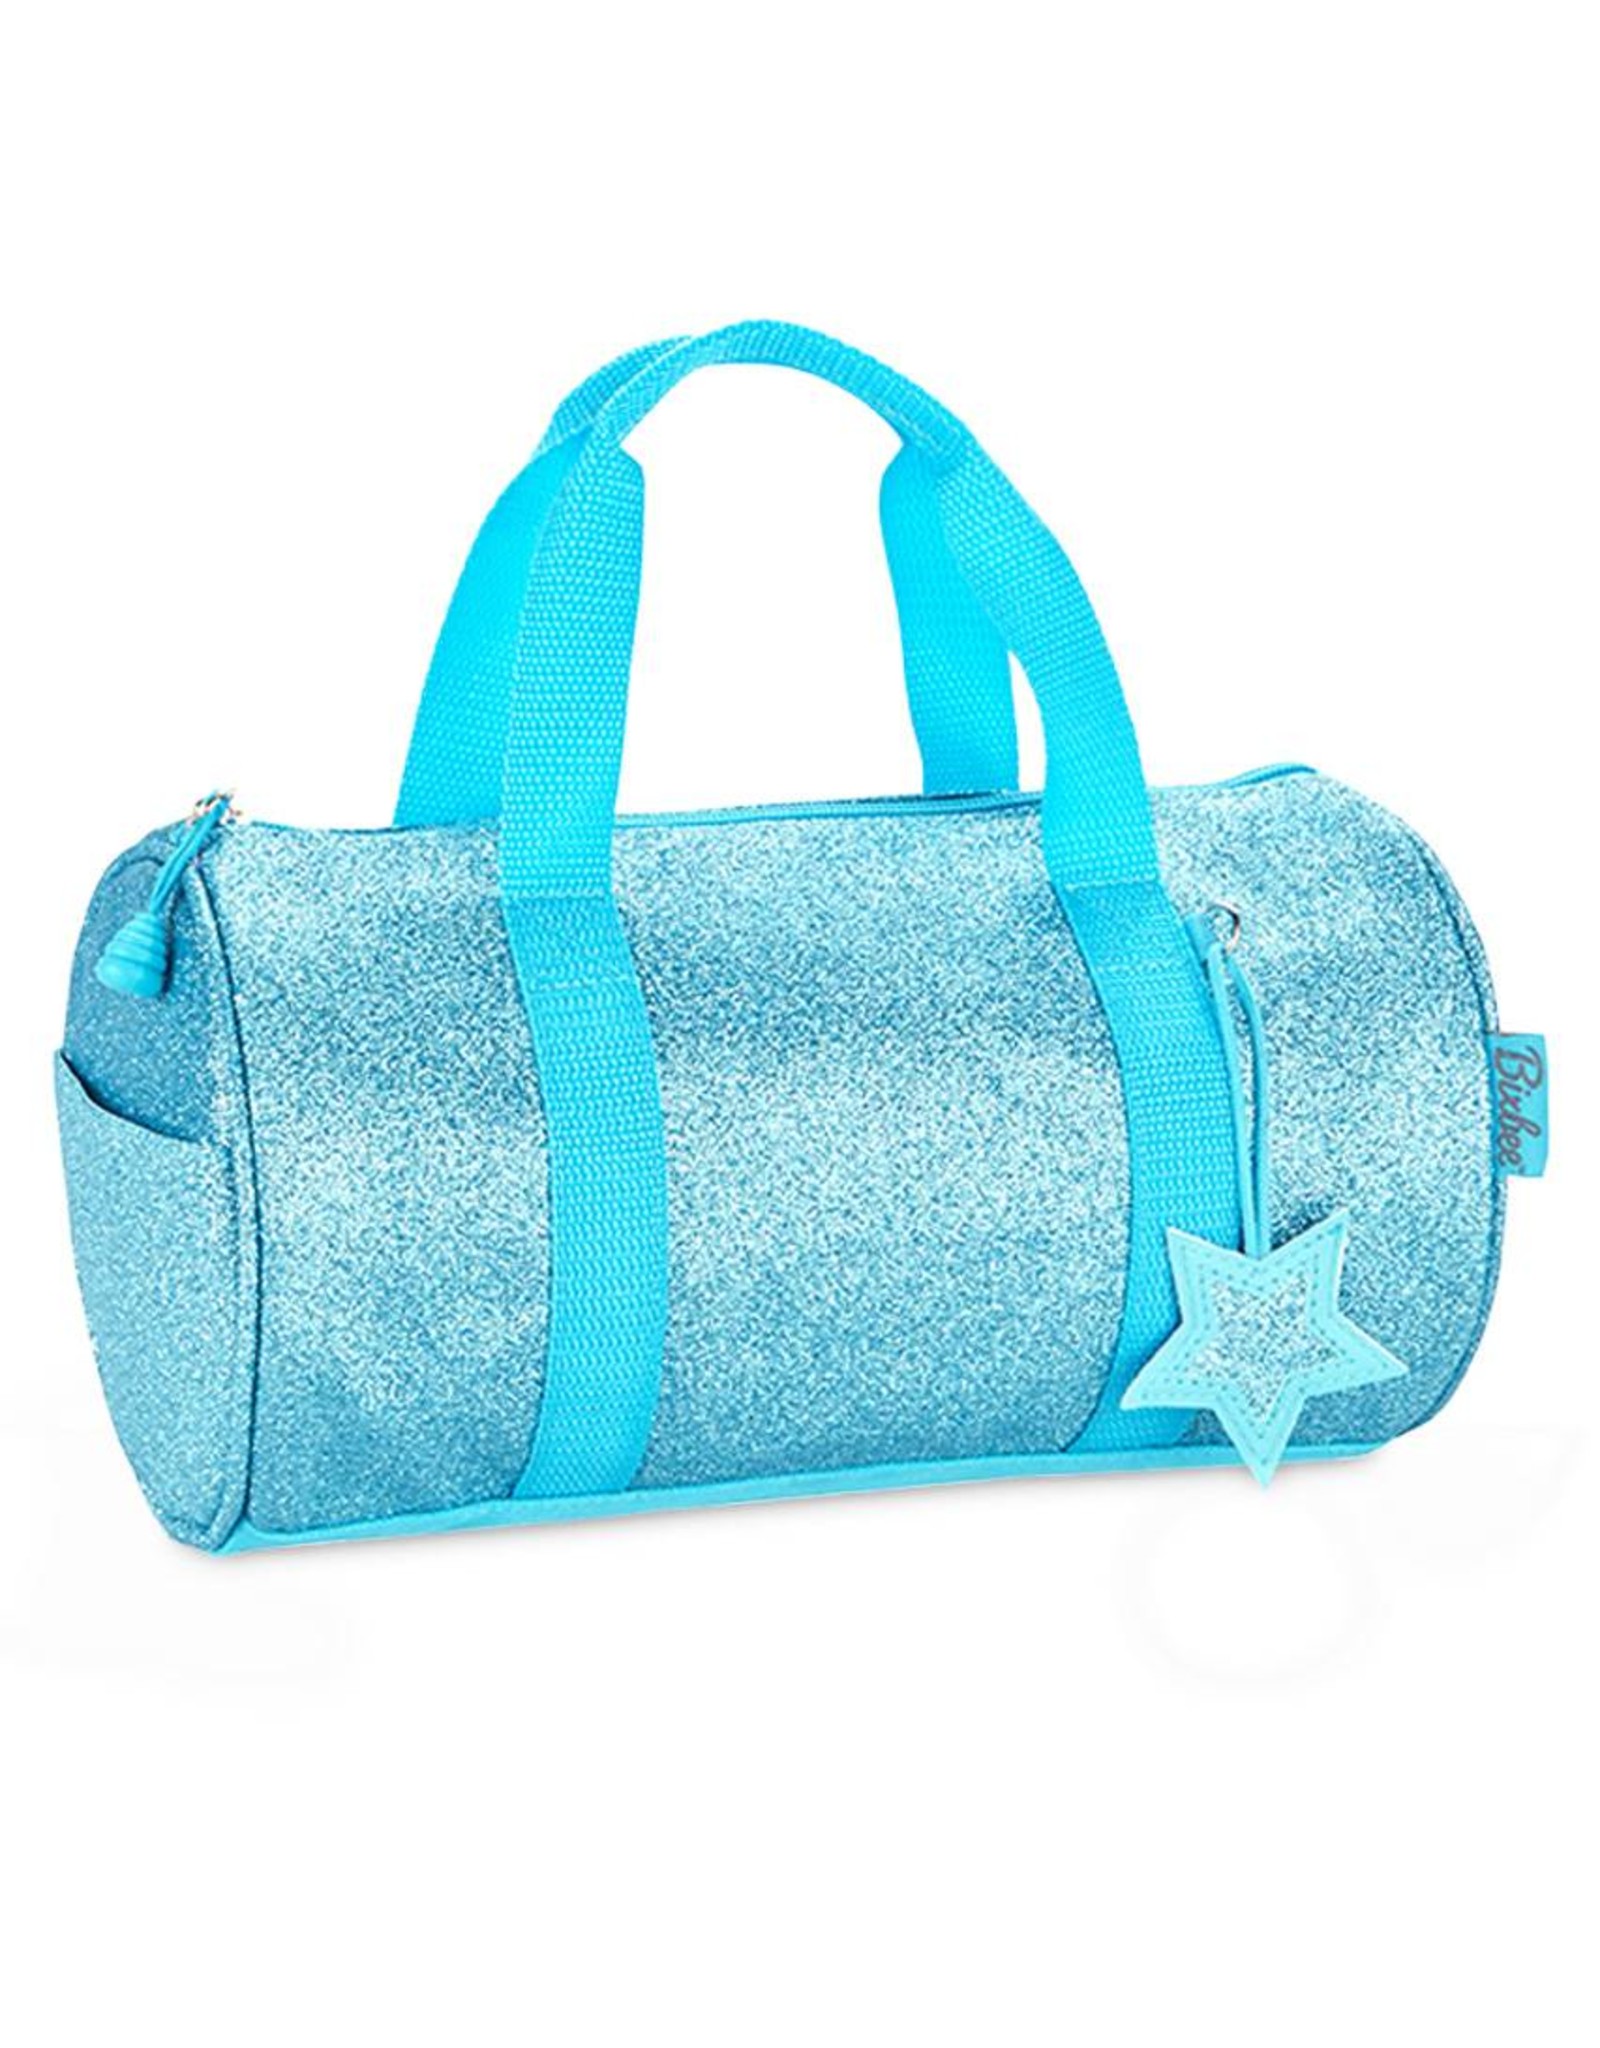 Bixbee Sparkalicious Small Duffle (Turquoise)